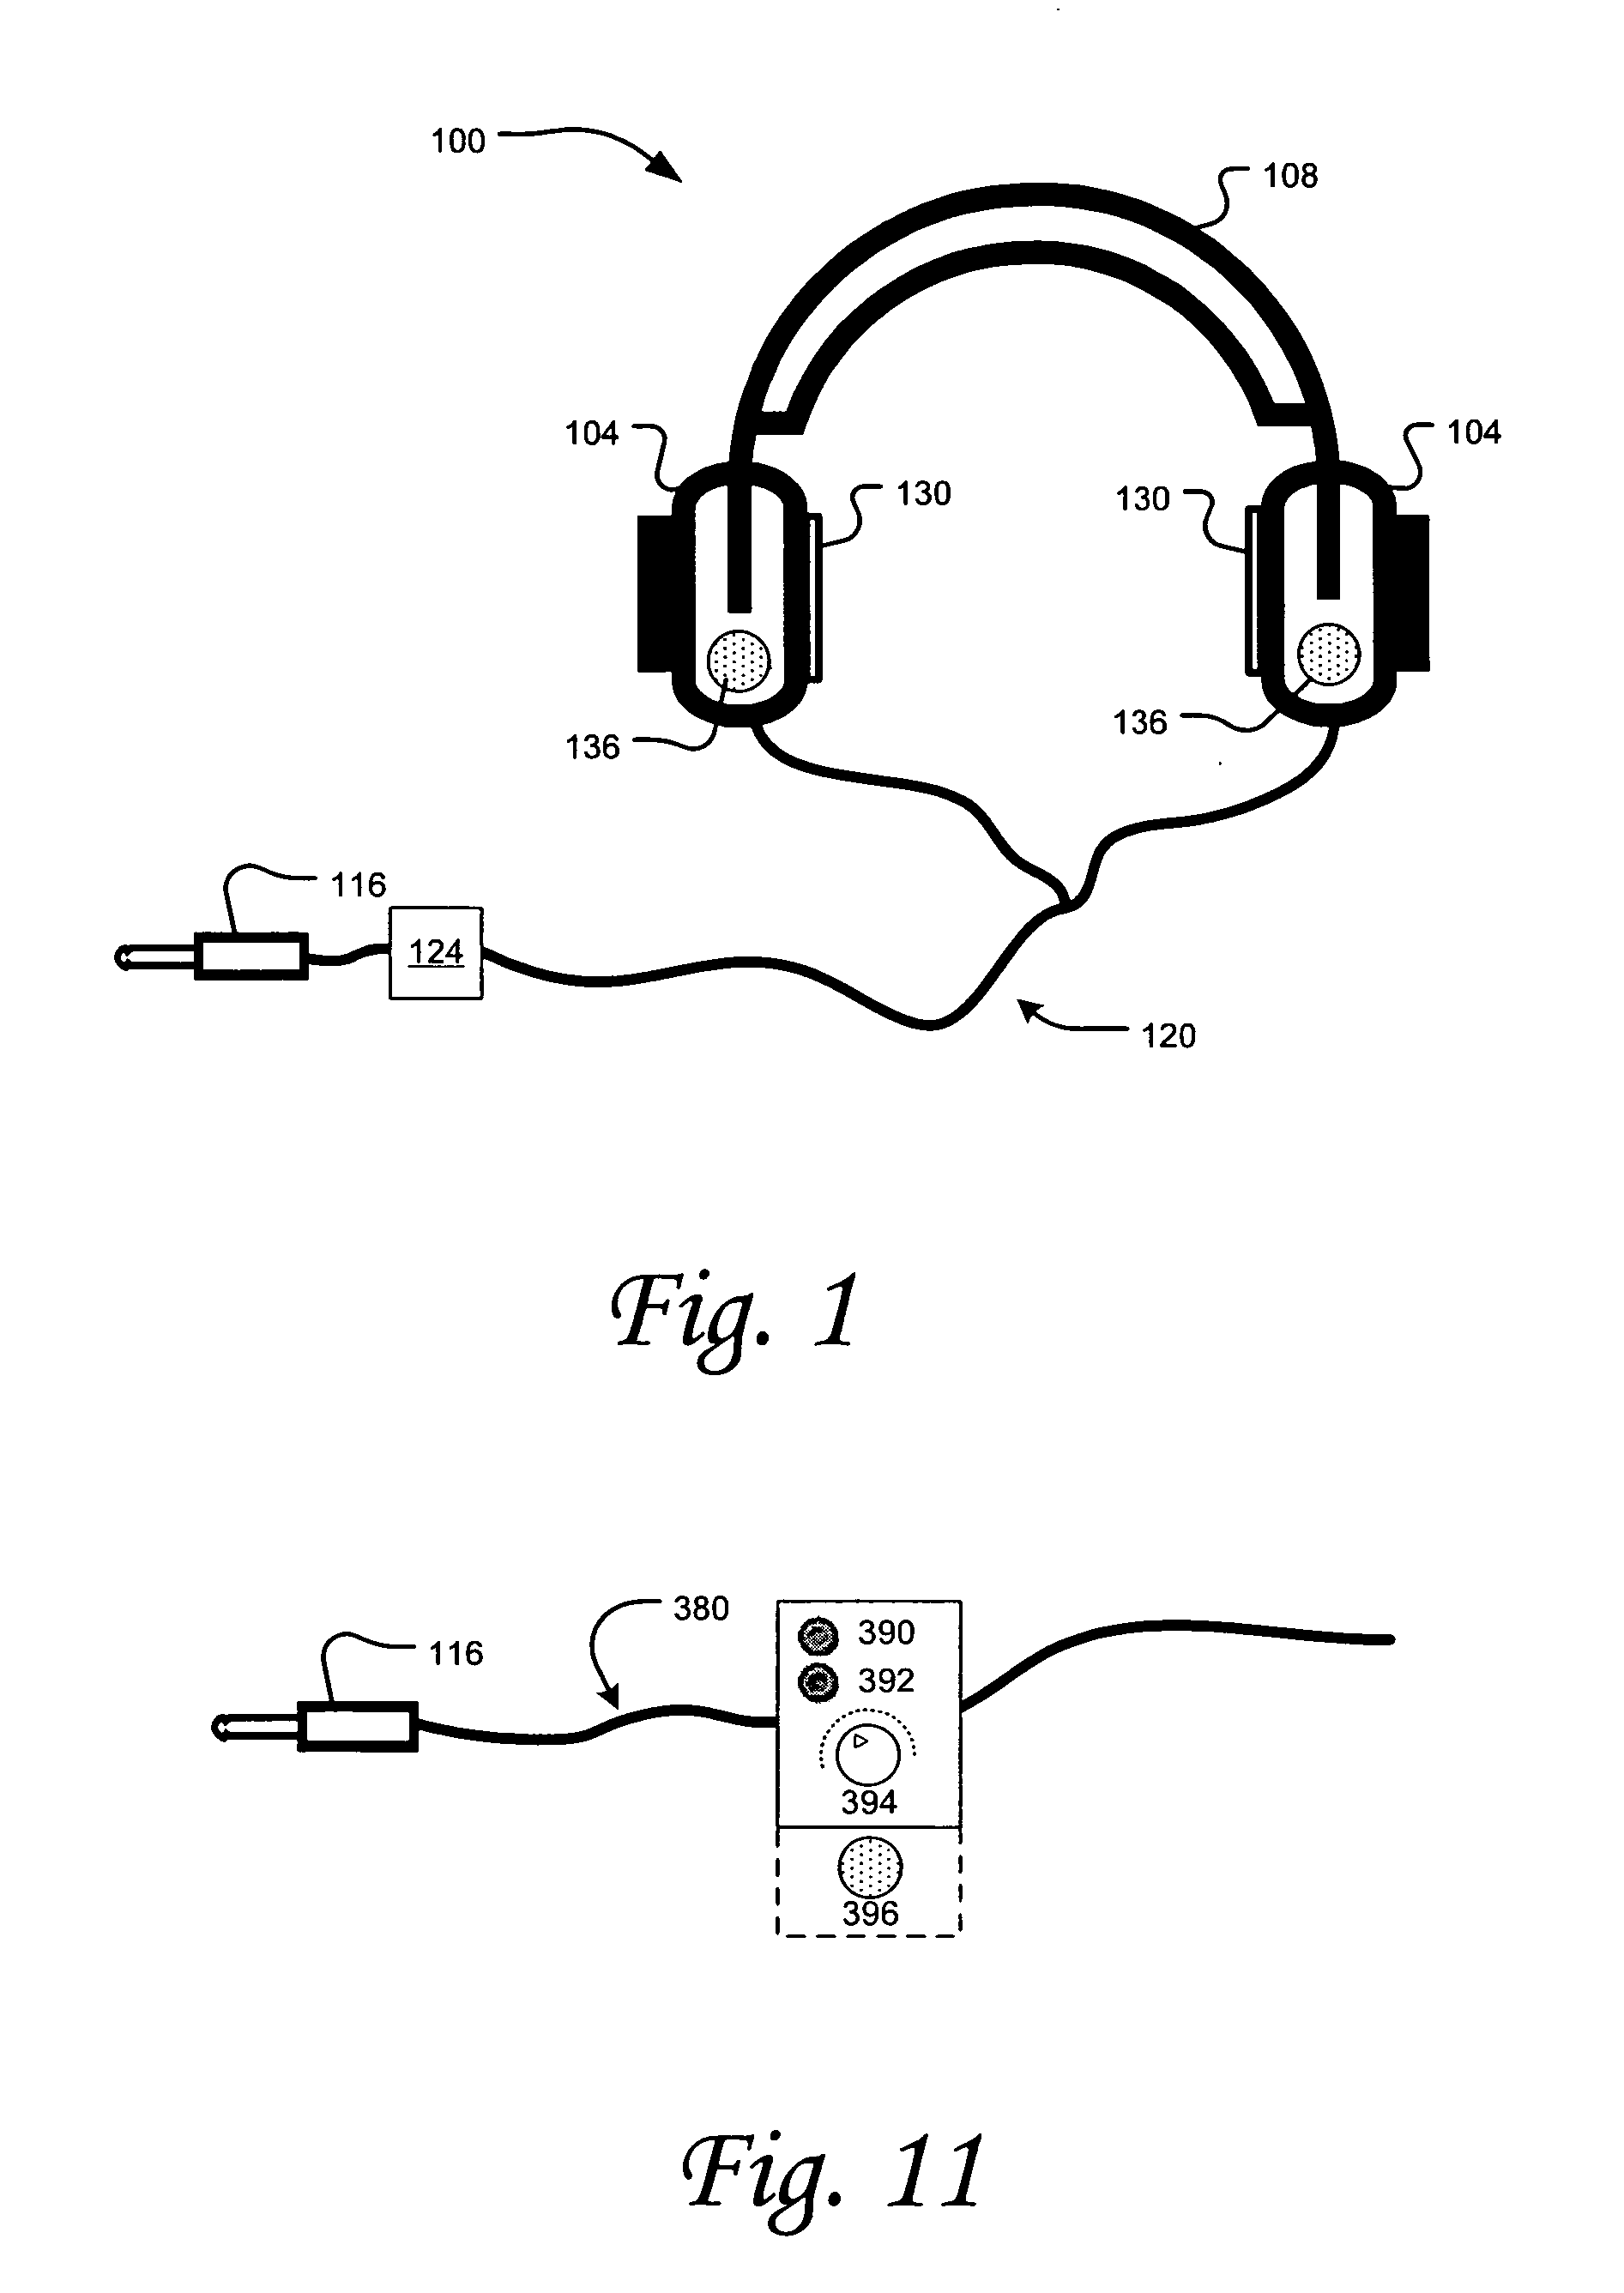 Headset audio bypass apparatus and method